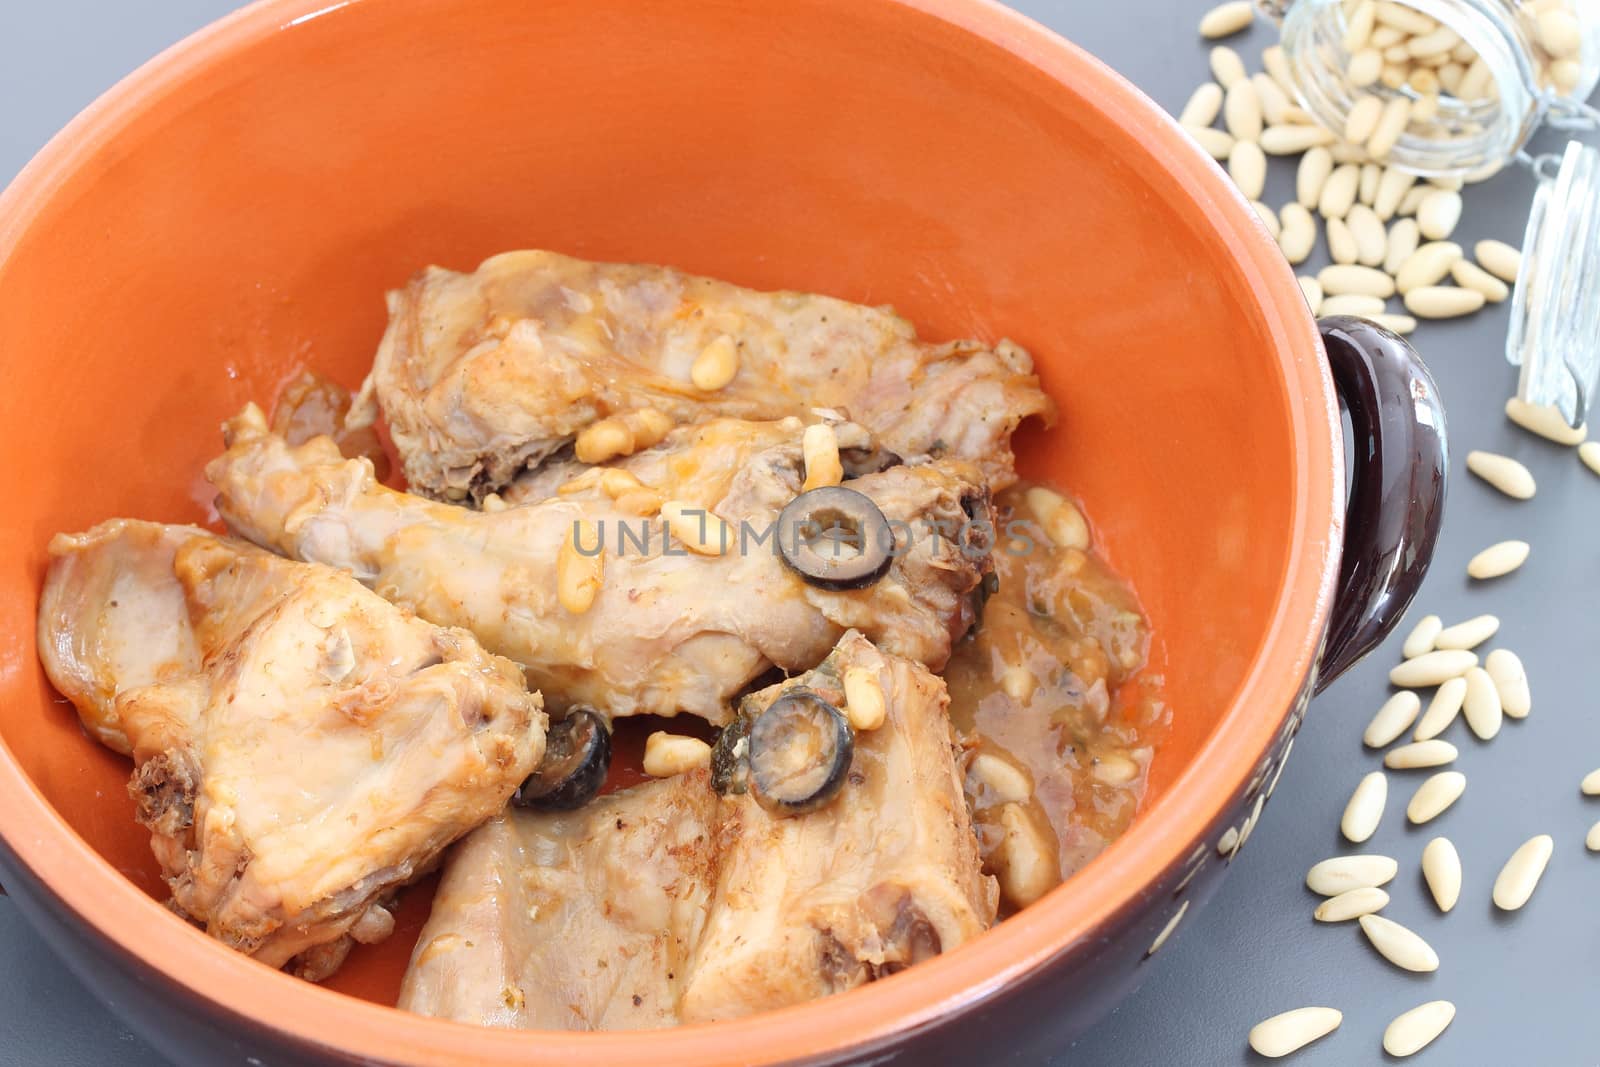 Rabbit meat with olives and pine nuts